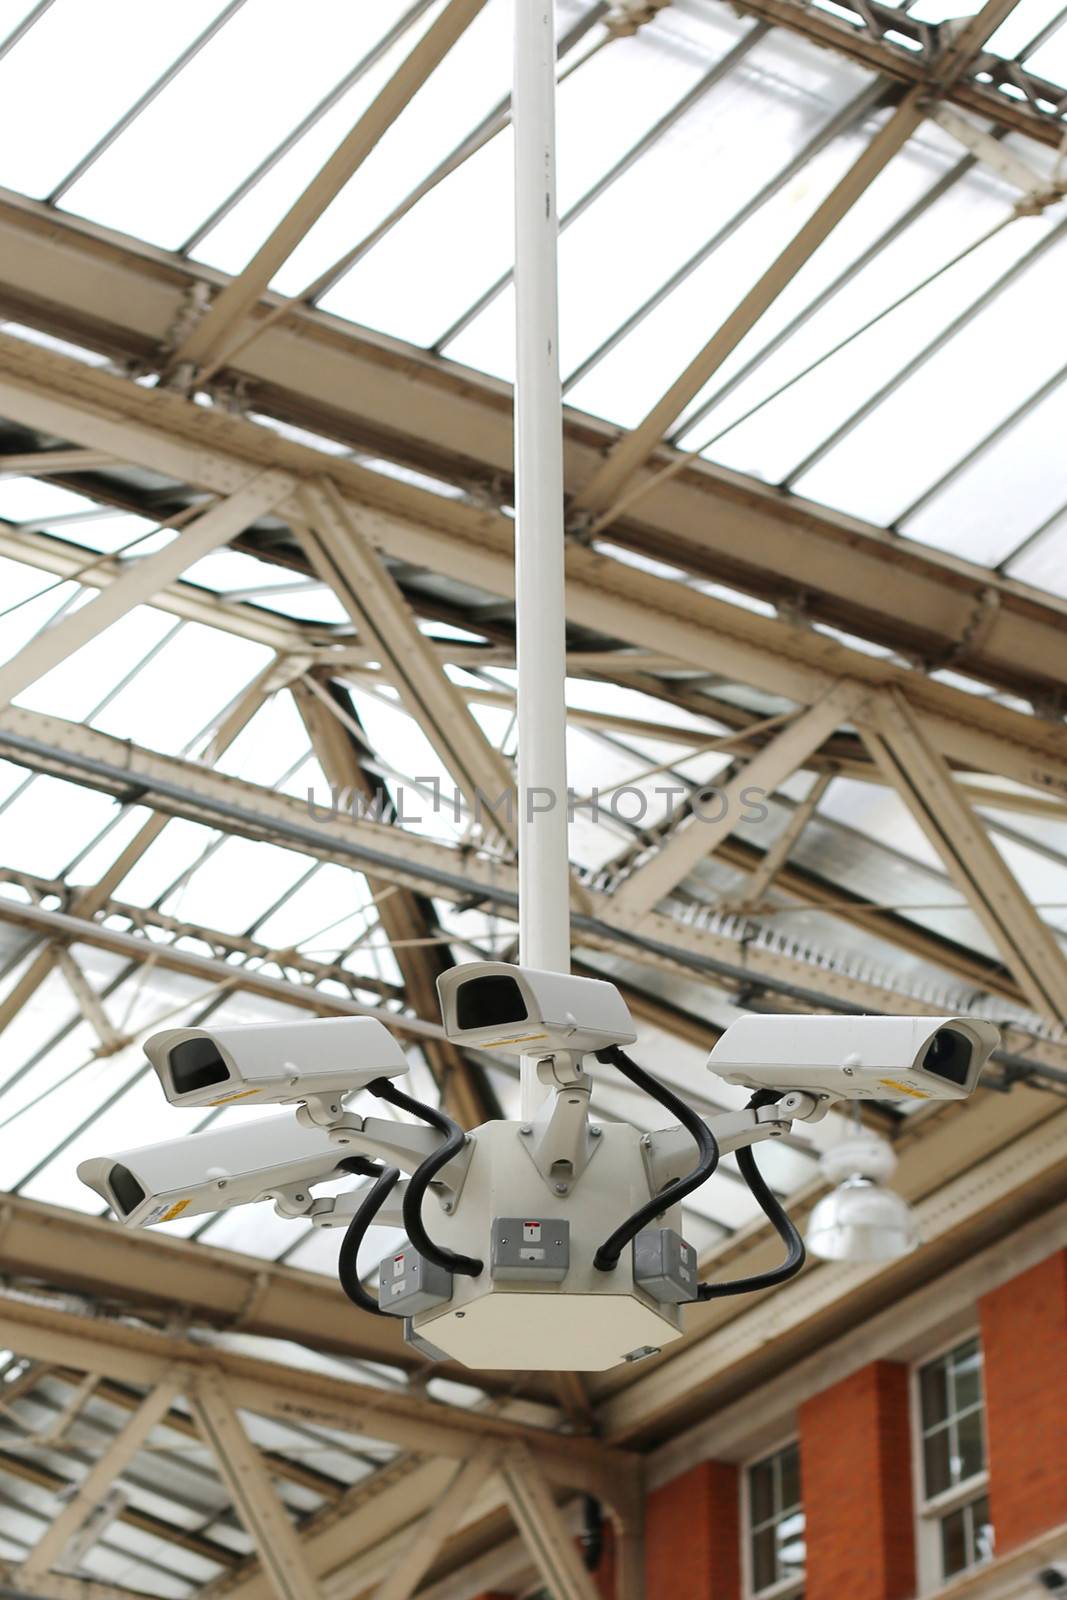 Waterloo Station London Security CCTV Cameras by Whiteboxmedia